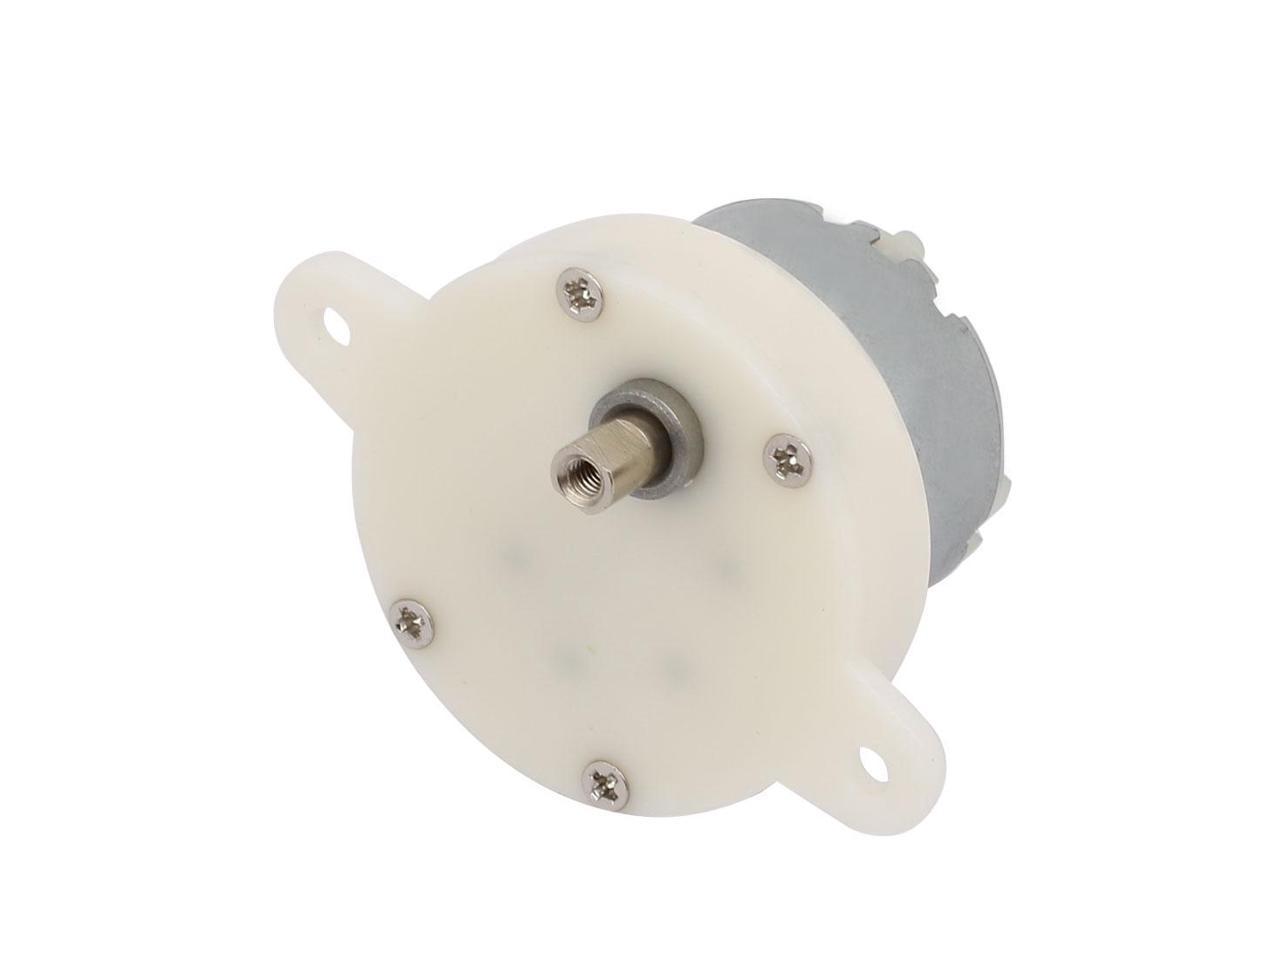 DC 6V Gear Motor 170RPM Reduction Gearbox Micro Electric Motor JS40-500 for DIY 